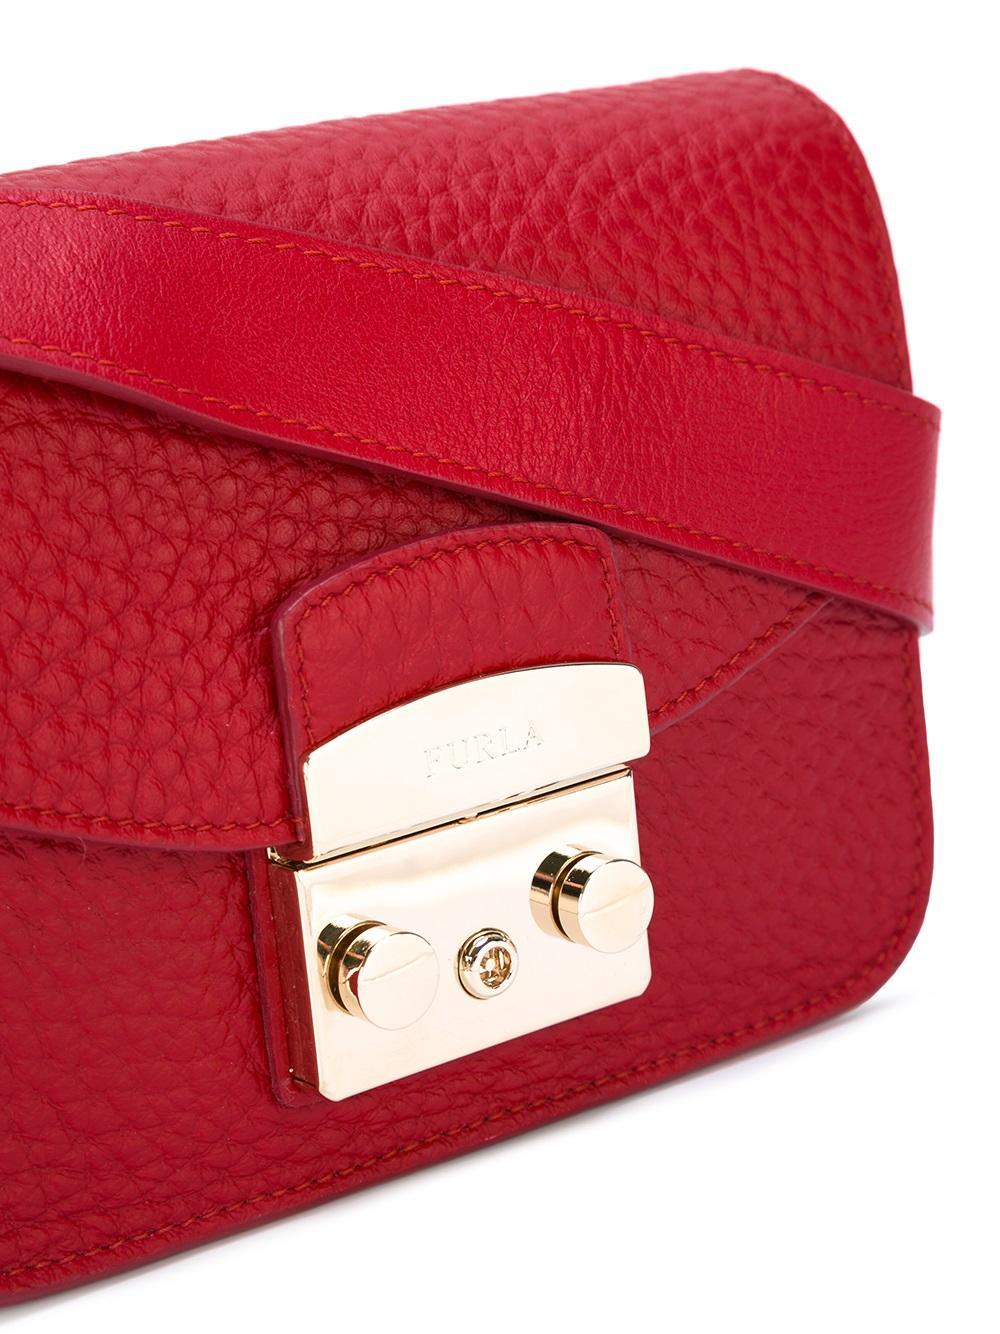 Lyst - Furla Thick Strap Crossbody Bag in Red